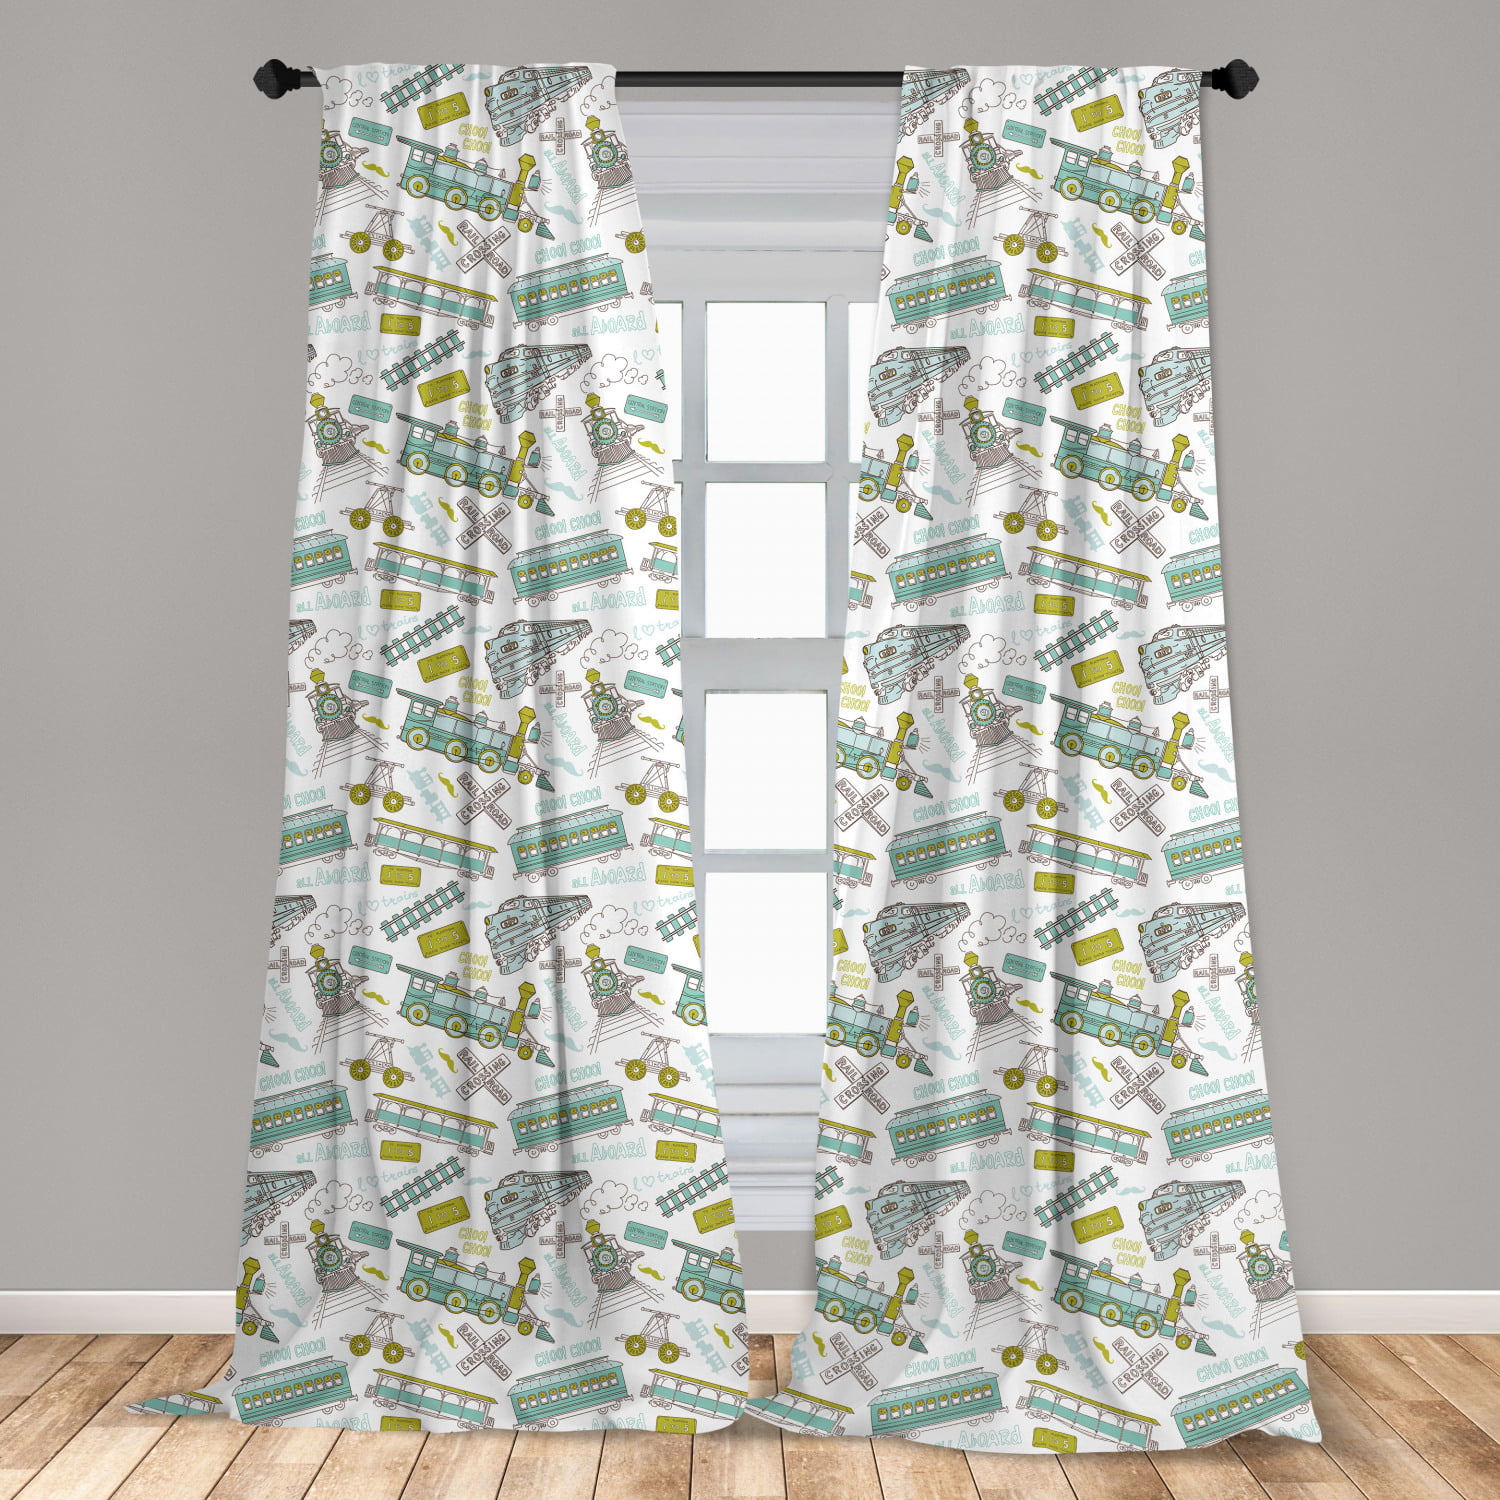 Valance Window Curtain NAVY WITH BRIGHT COLORED LIZARDS Boys Room Custom Made 